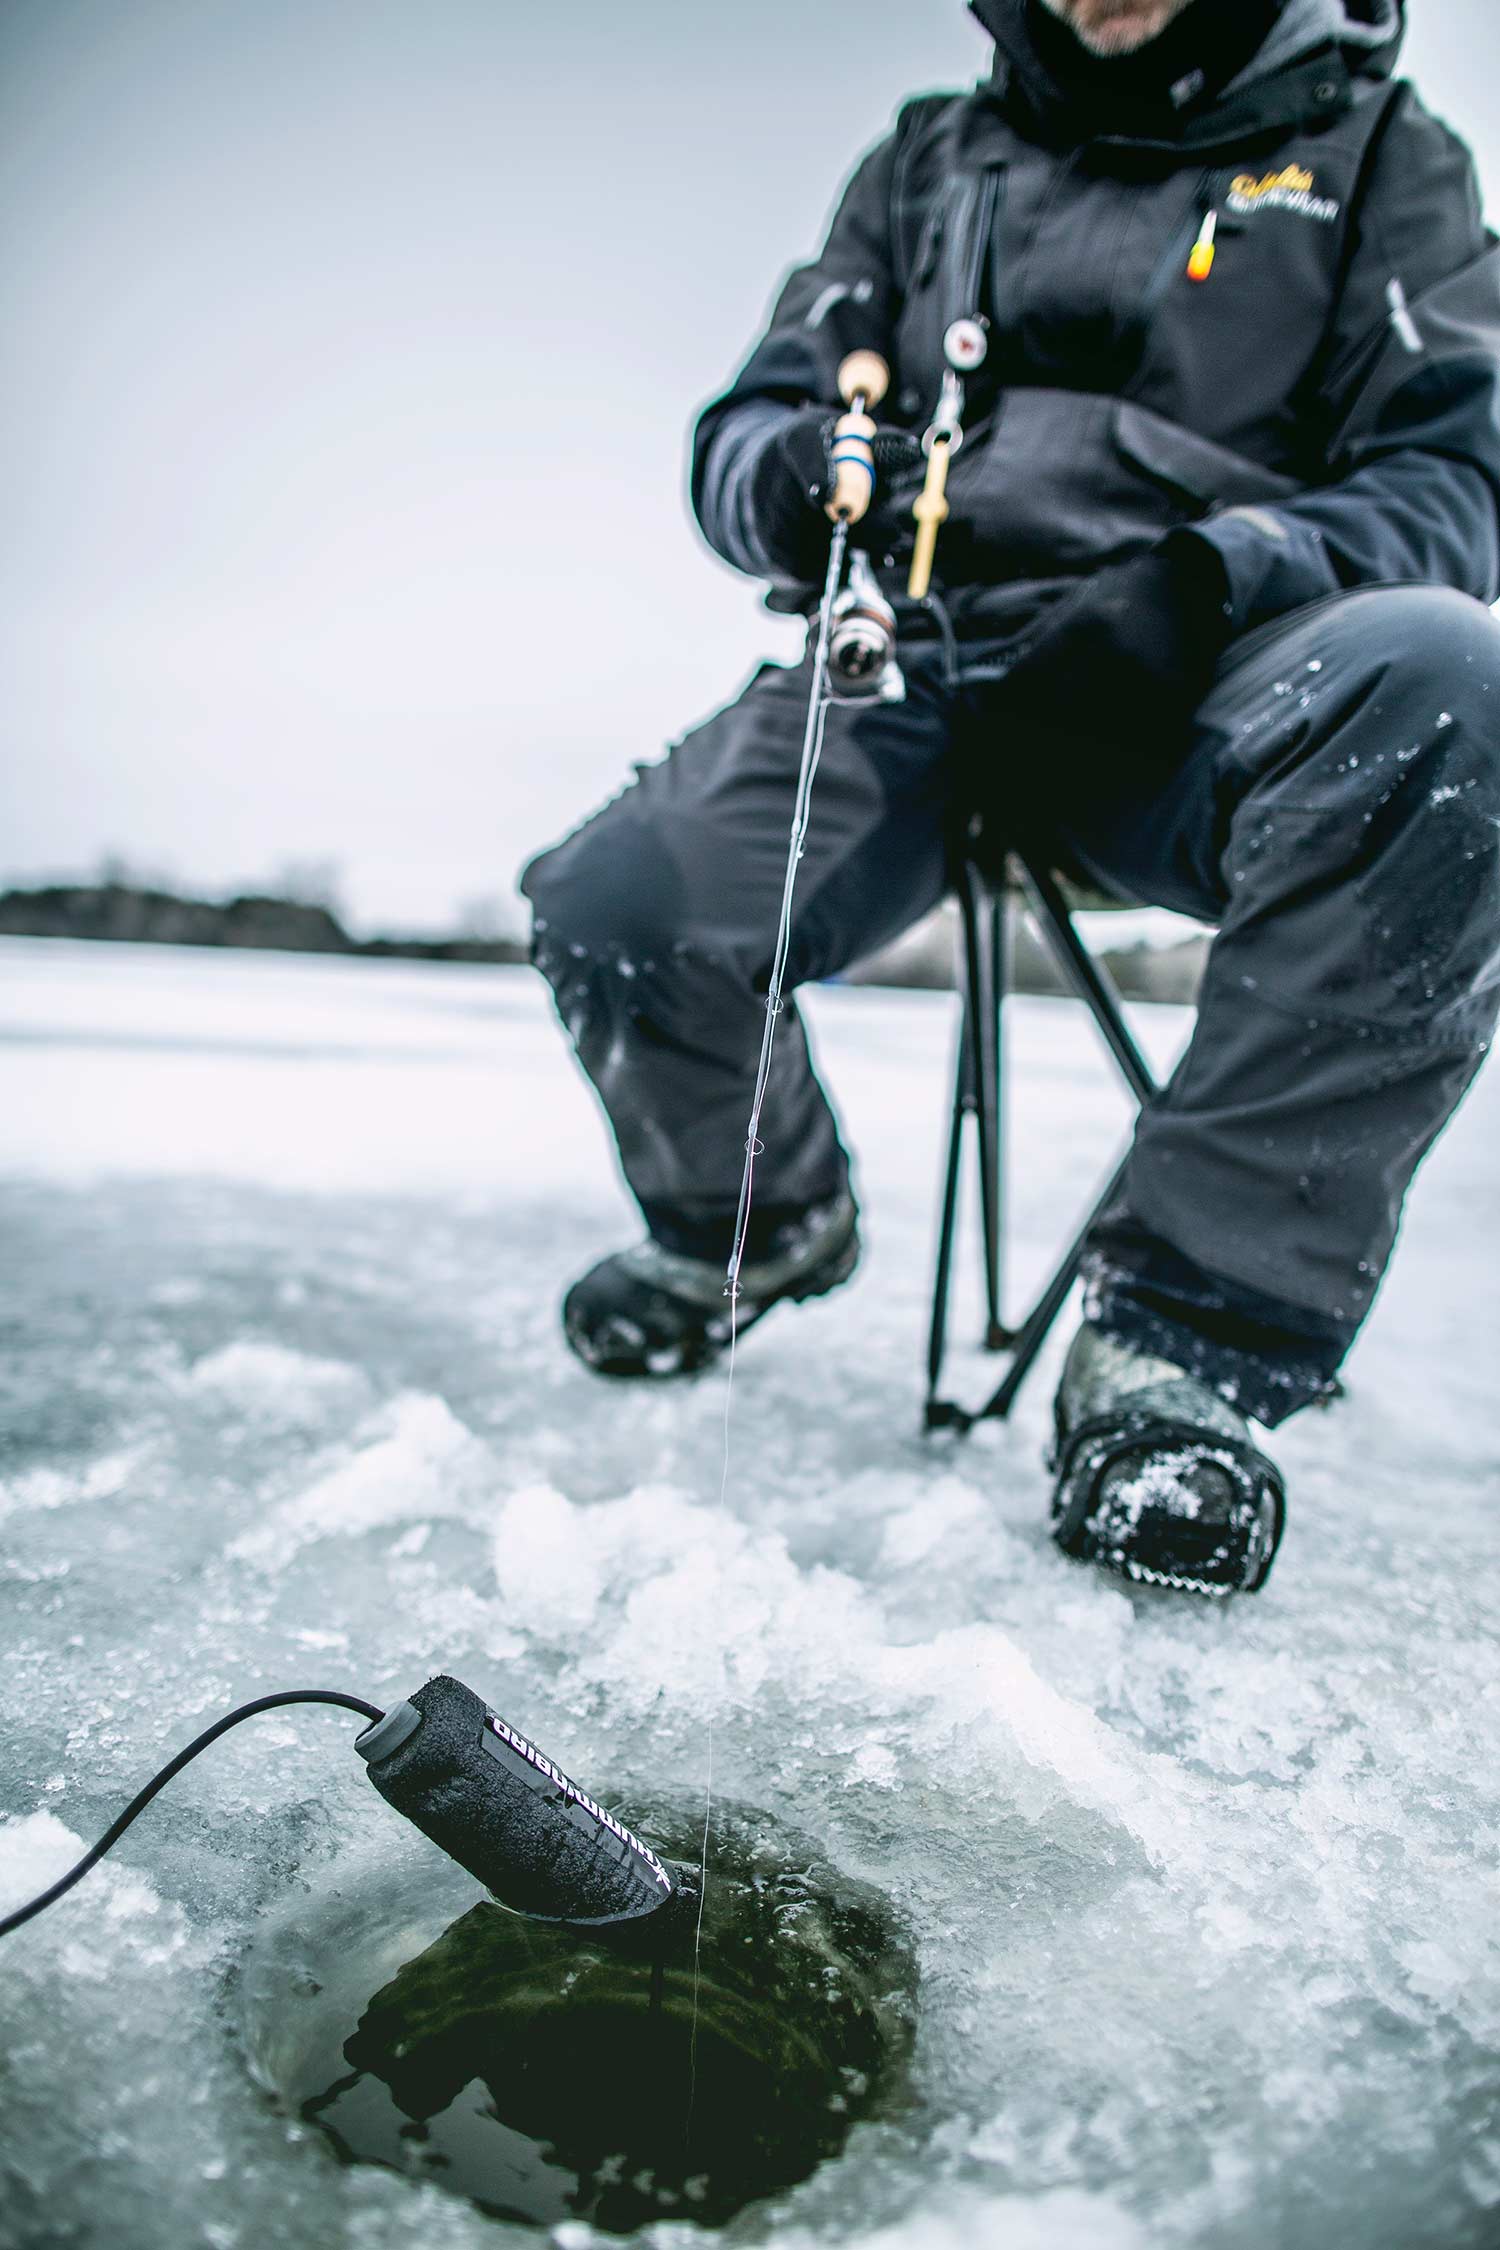 An angler fishes in an ice fishing hole.